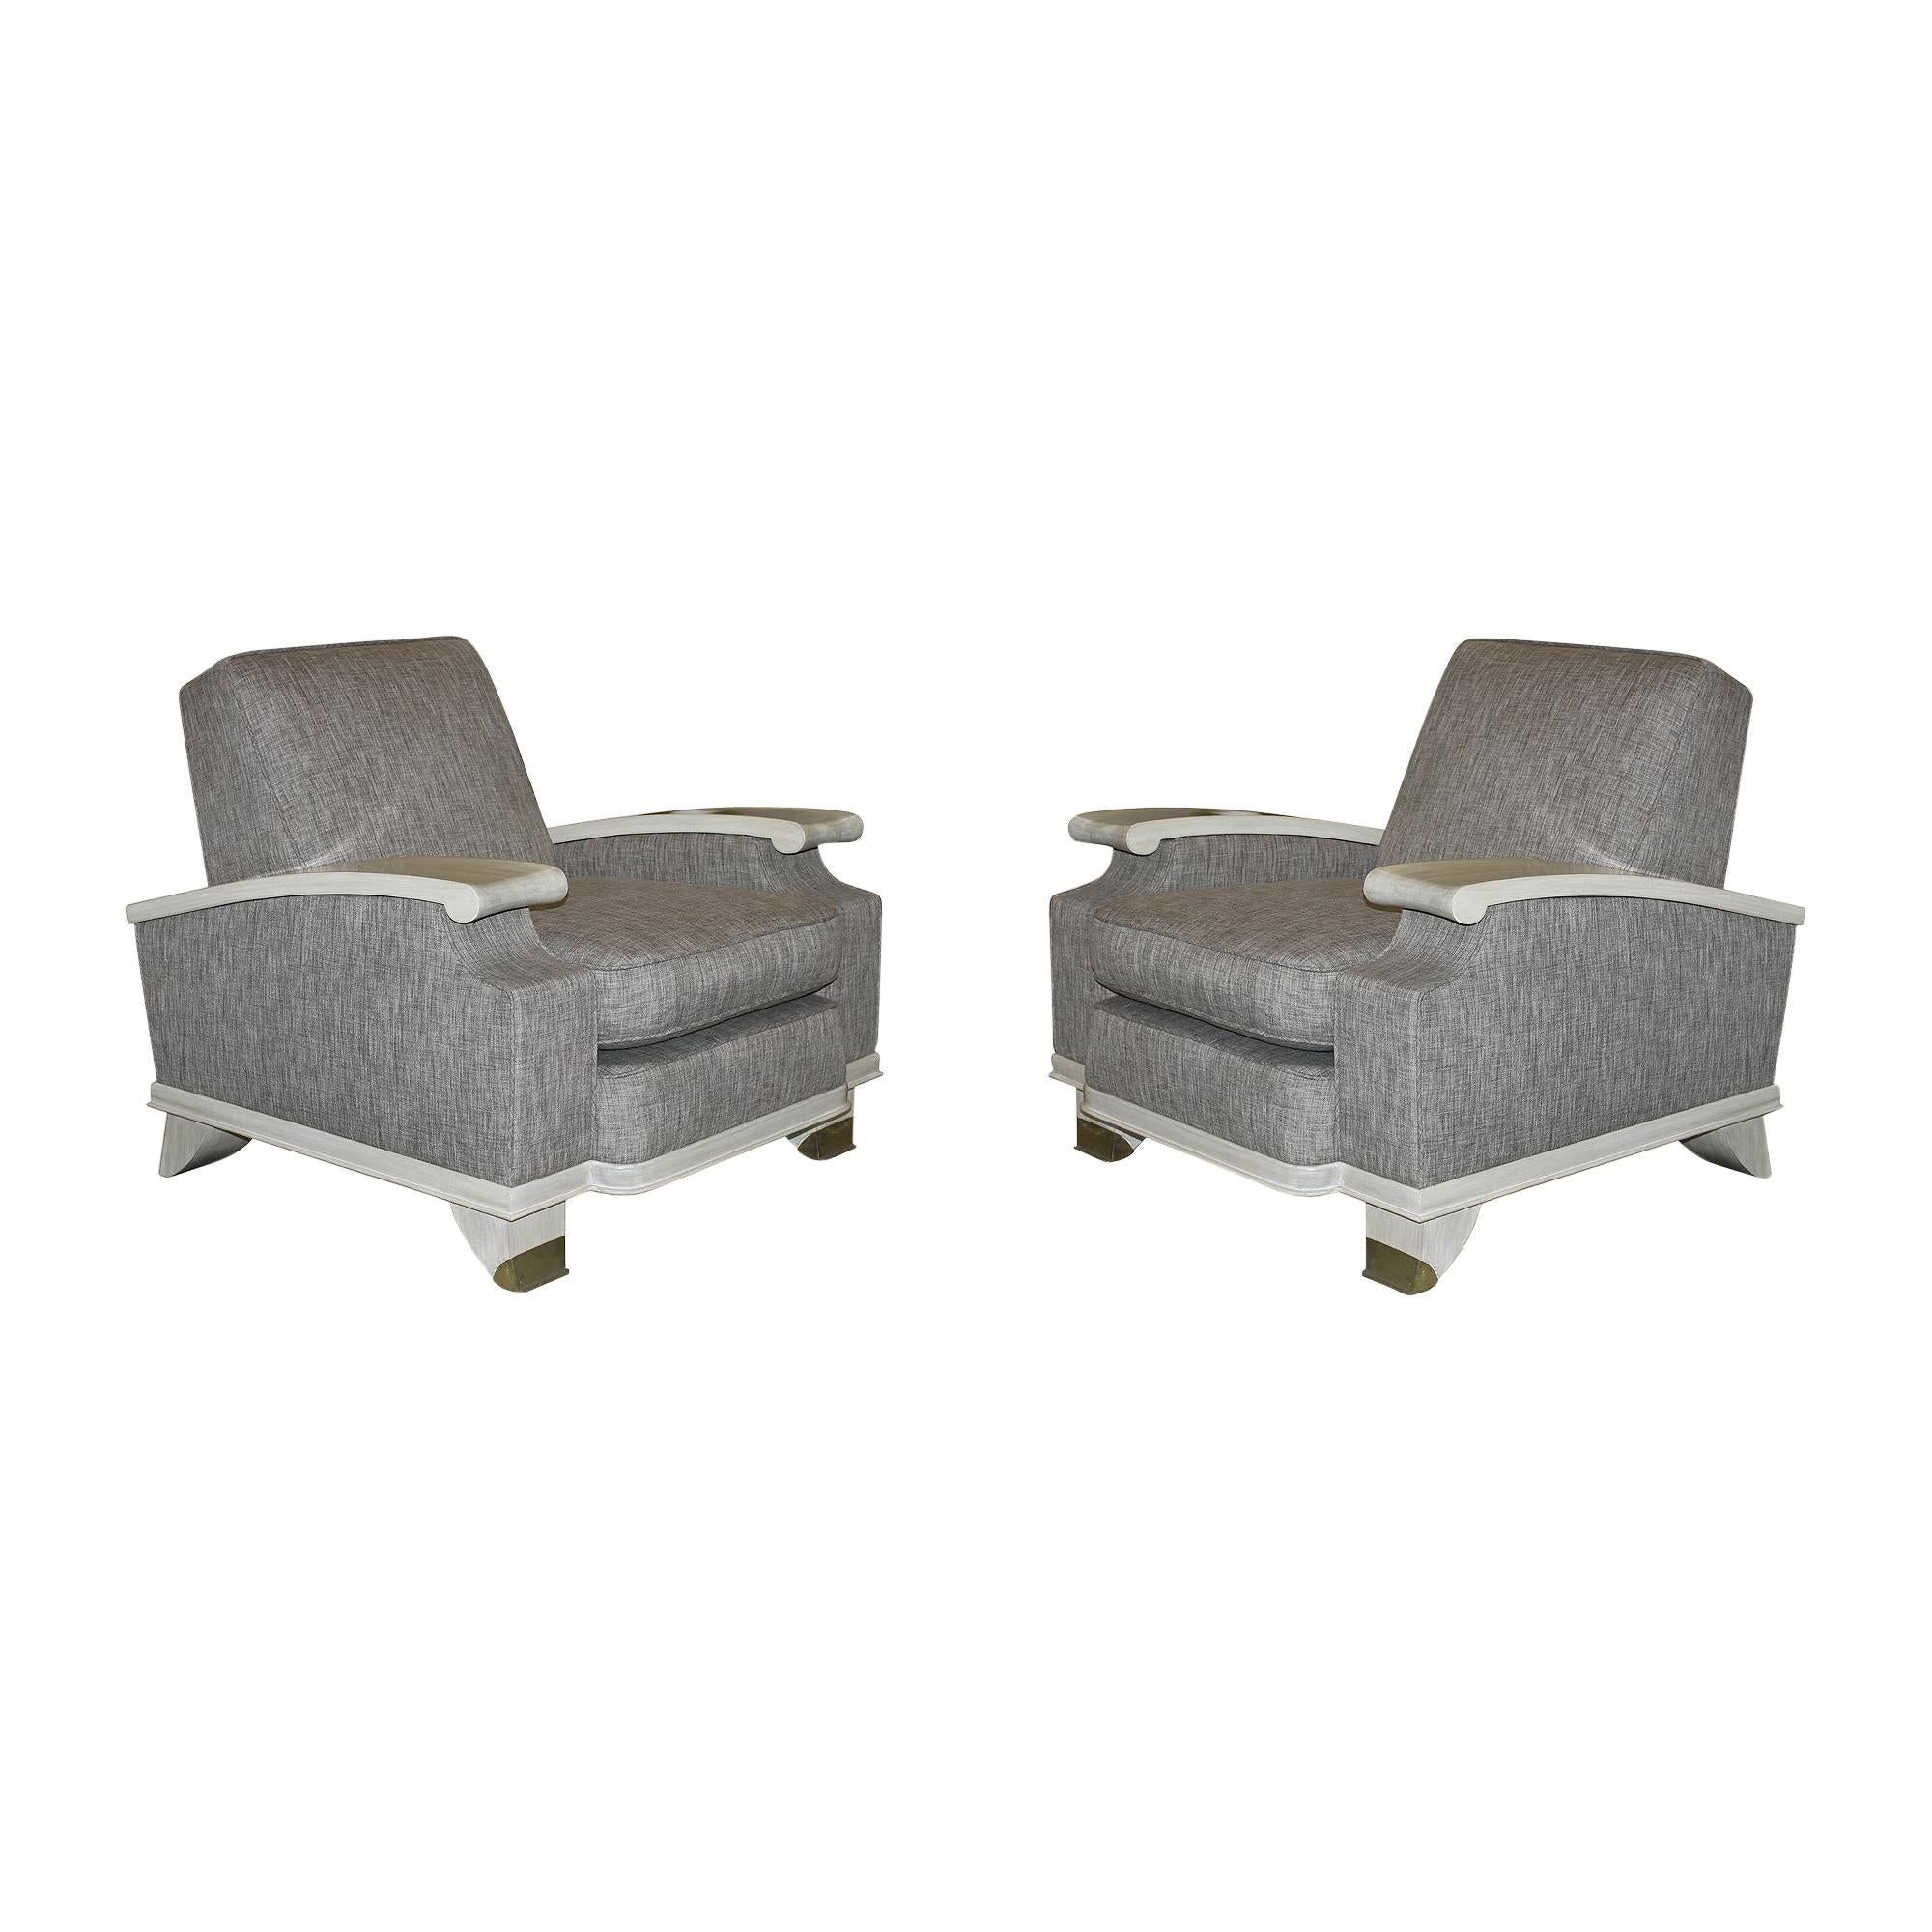 Jacques Adnet Model of Pair of Large Comfortable Armchairs